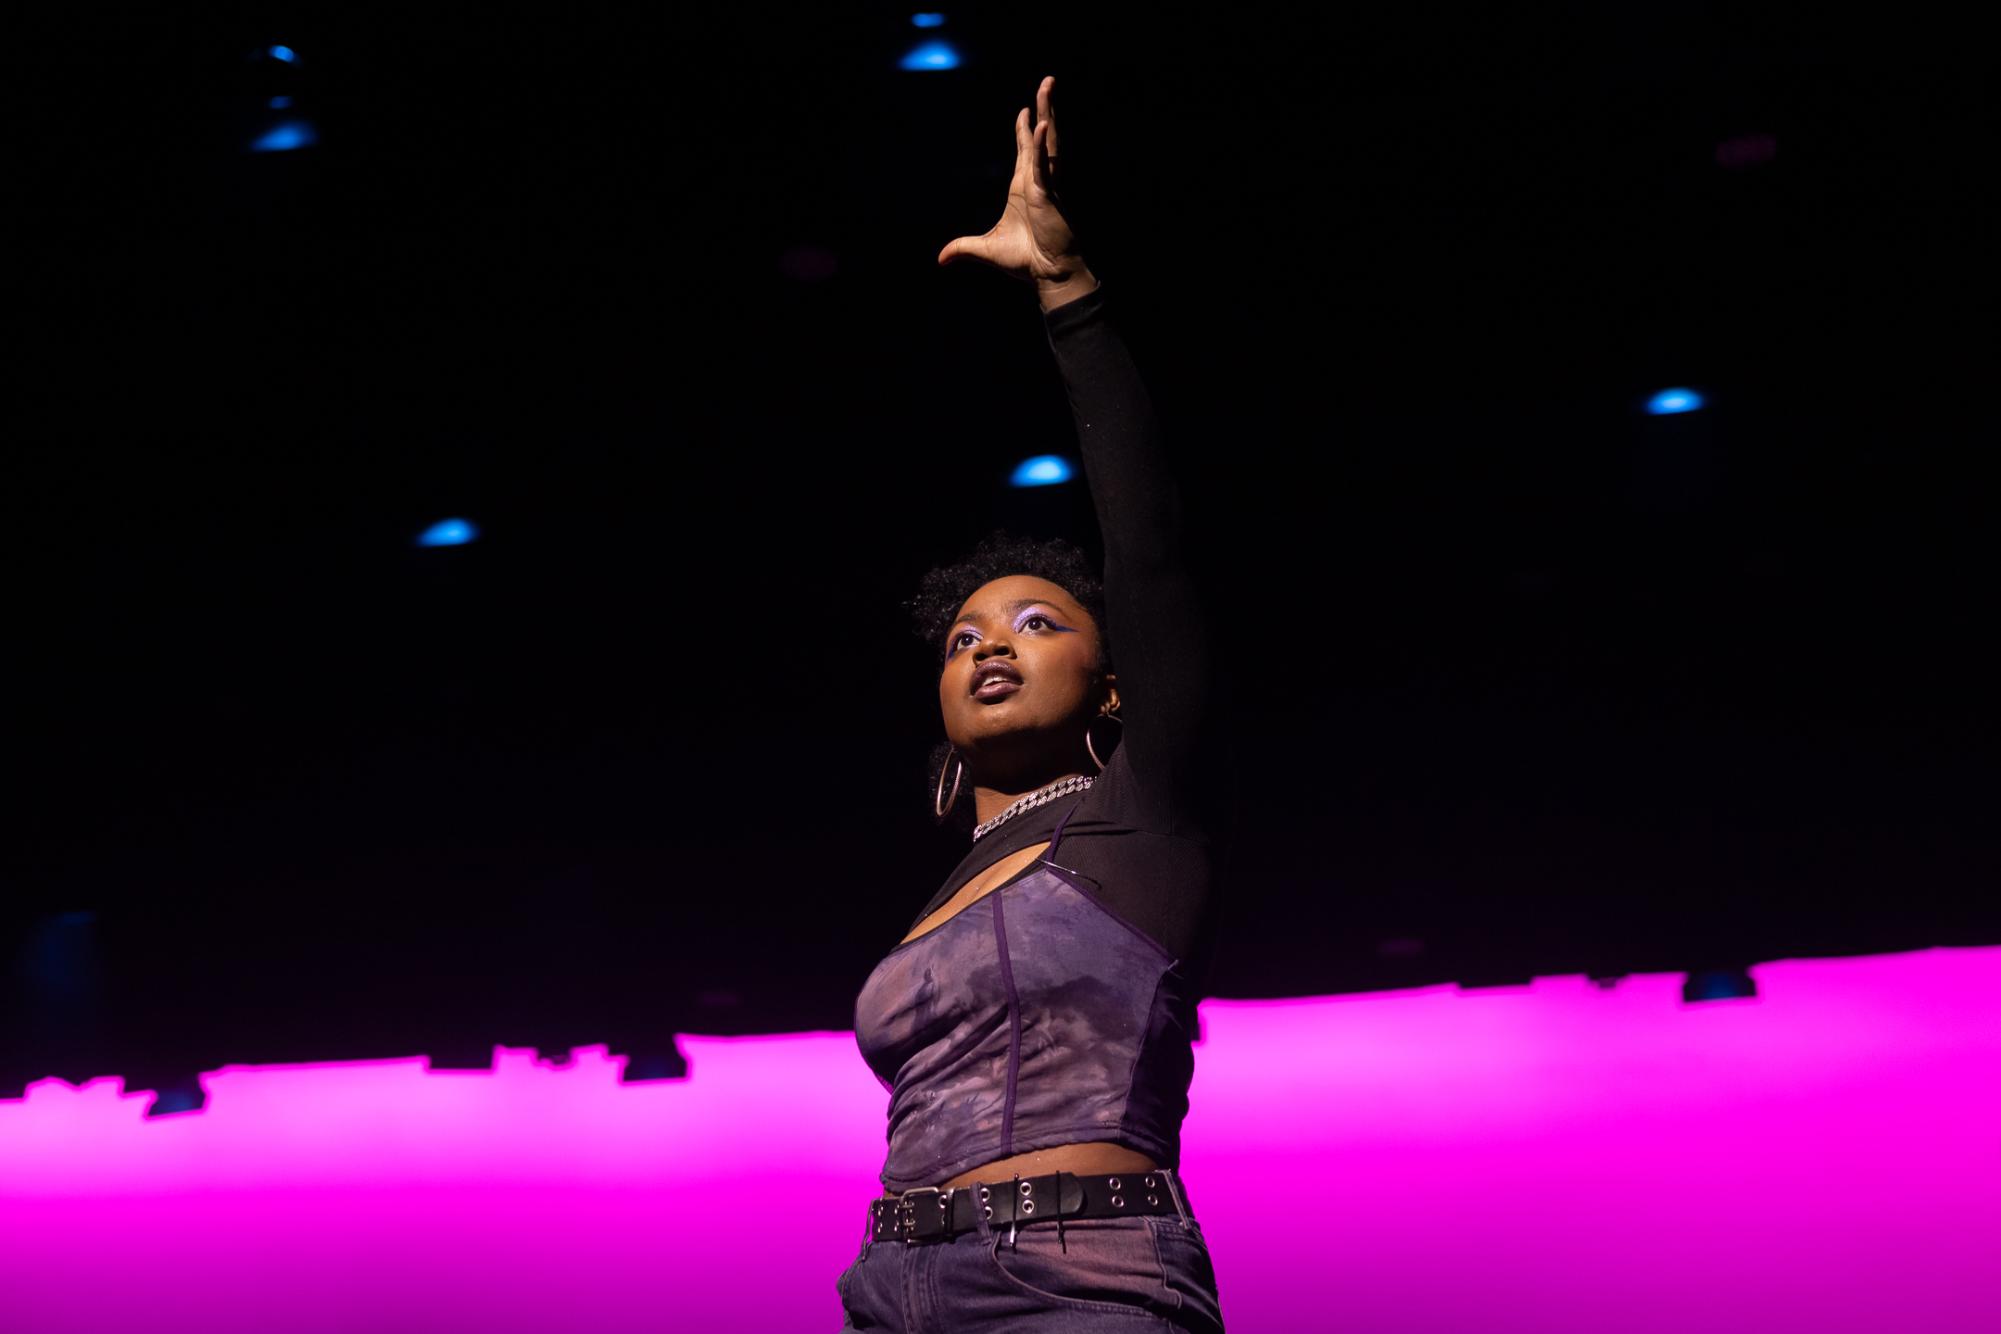 A woman reaches her hand upward toward a crowd while onstage.